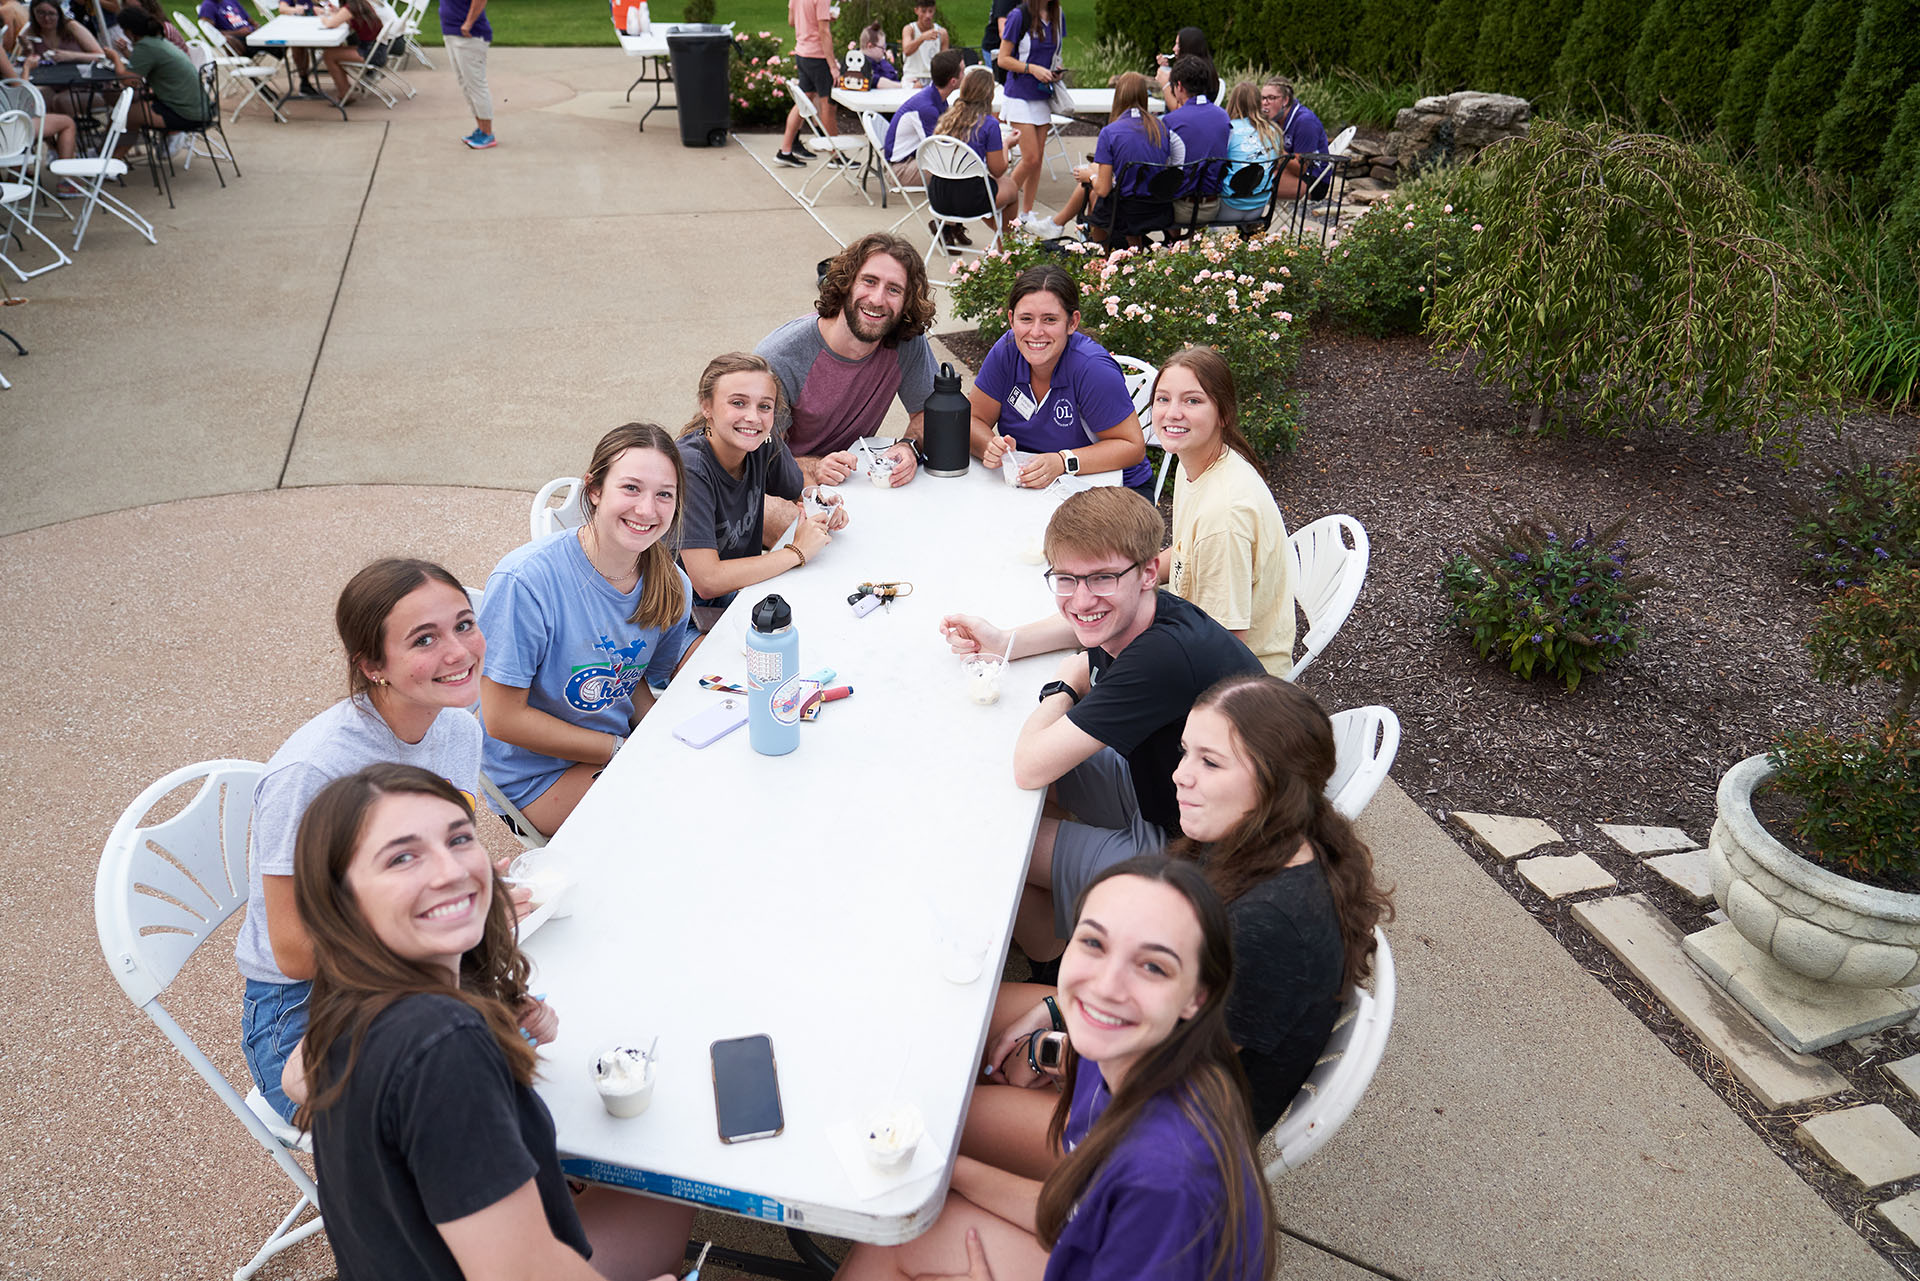 Welcome Week students meeting each other at Ice Cream social.